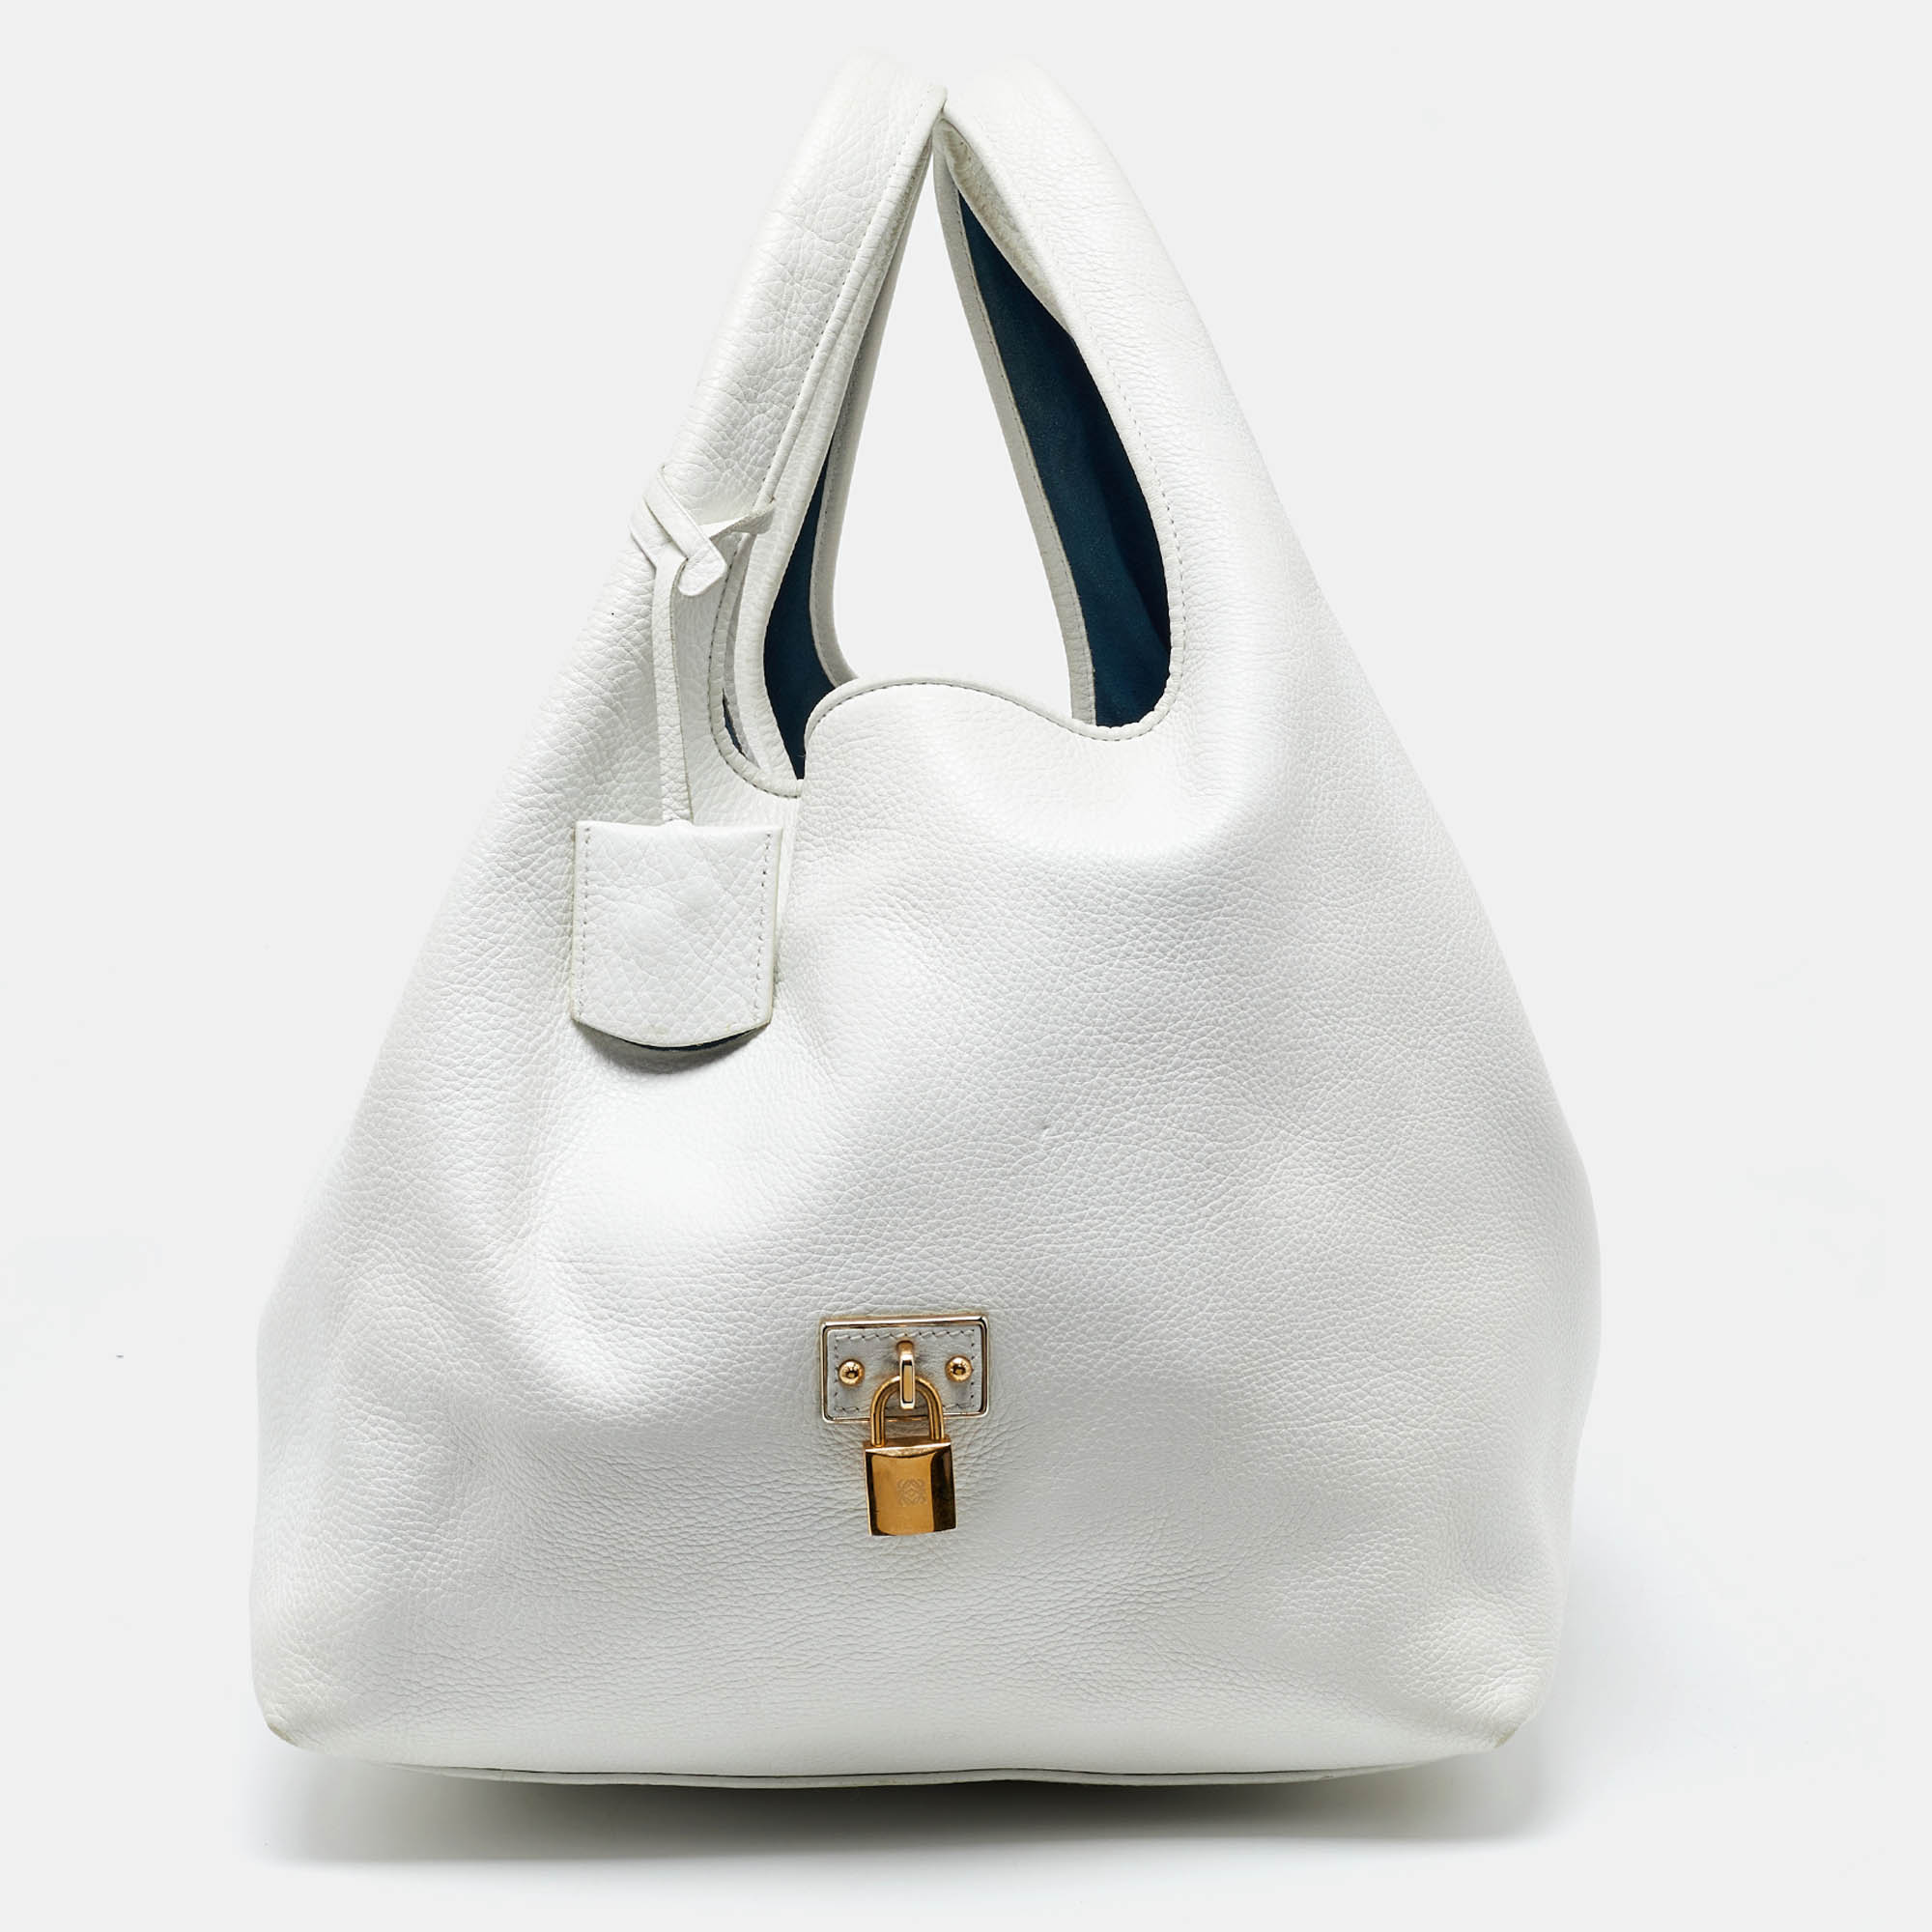 Stylish handbags never fail to make a fashionable impression. Make this Loewe white hobo yours by pairing it with your sophisticated workwear as well as chic casual looks.